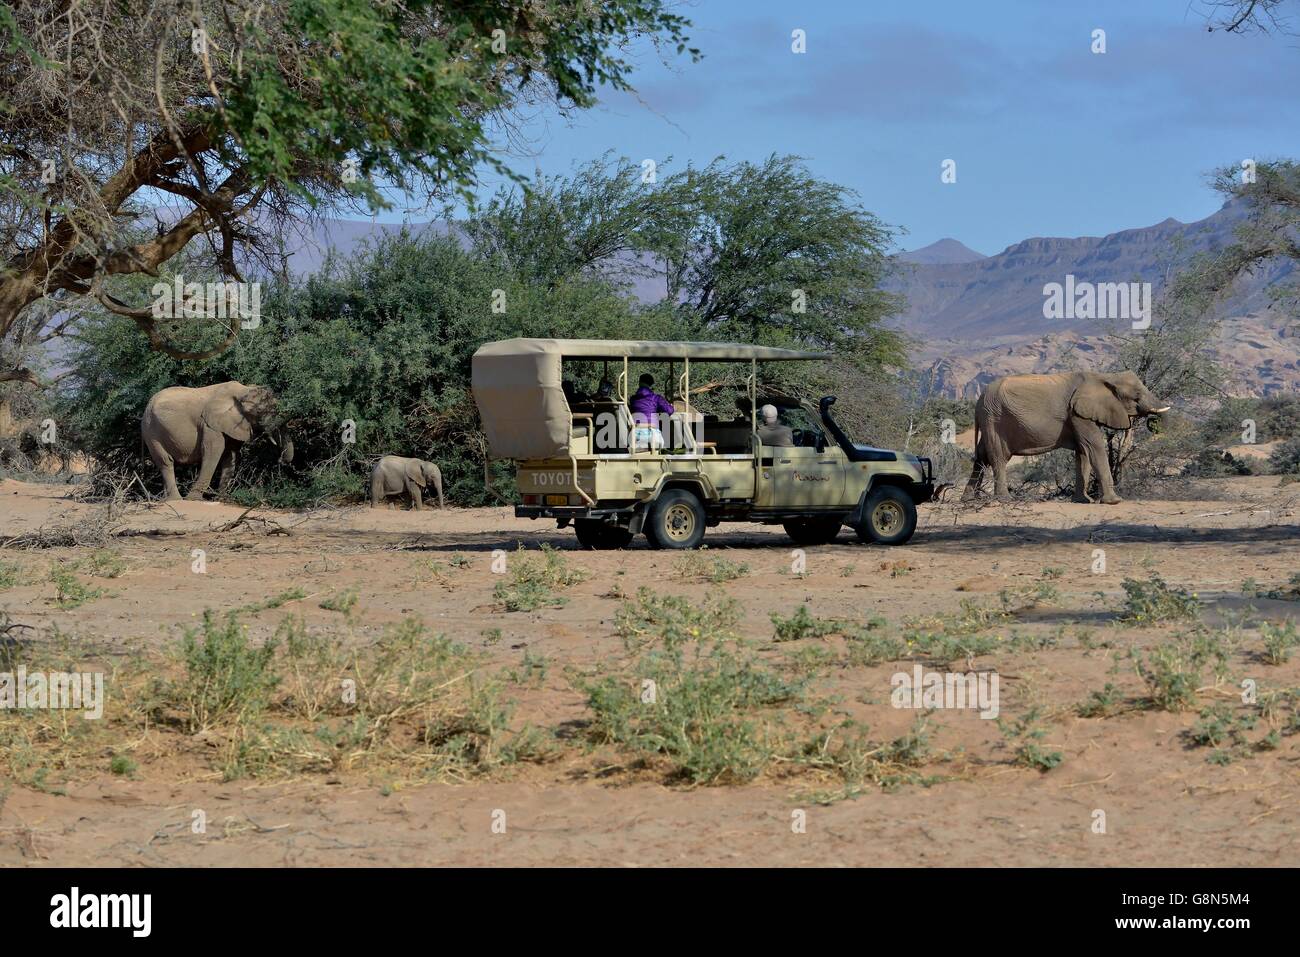 Tourists observing desert elephants, African elephants (Loxodonta africana), dry riverbed of the Huab, Damaraland, Namibia Stock Photo